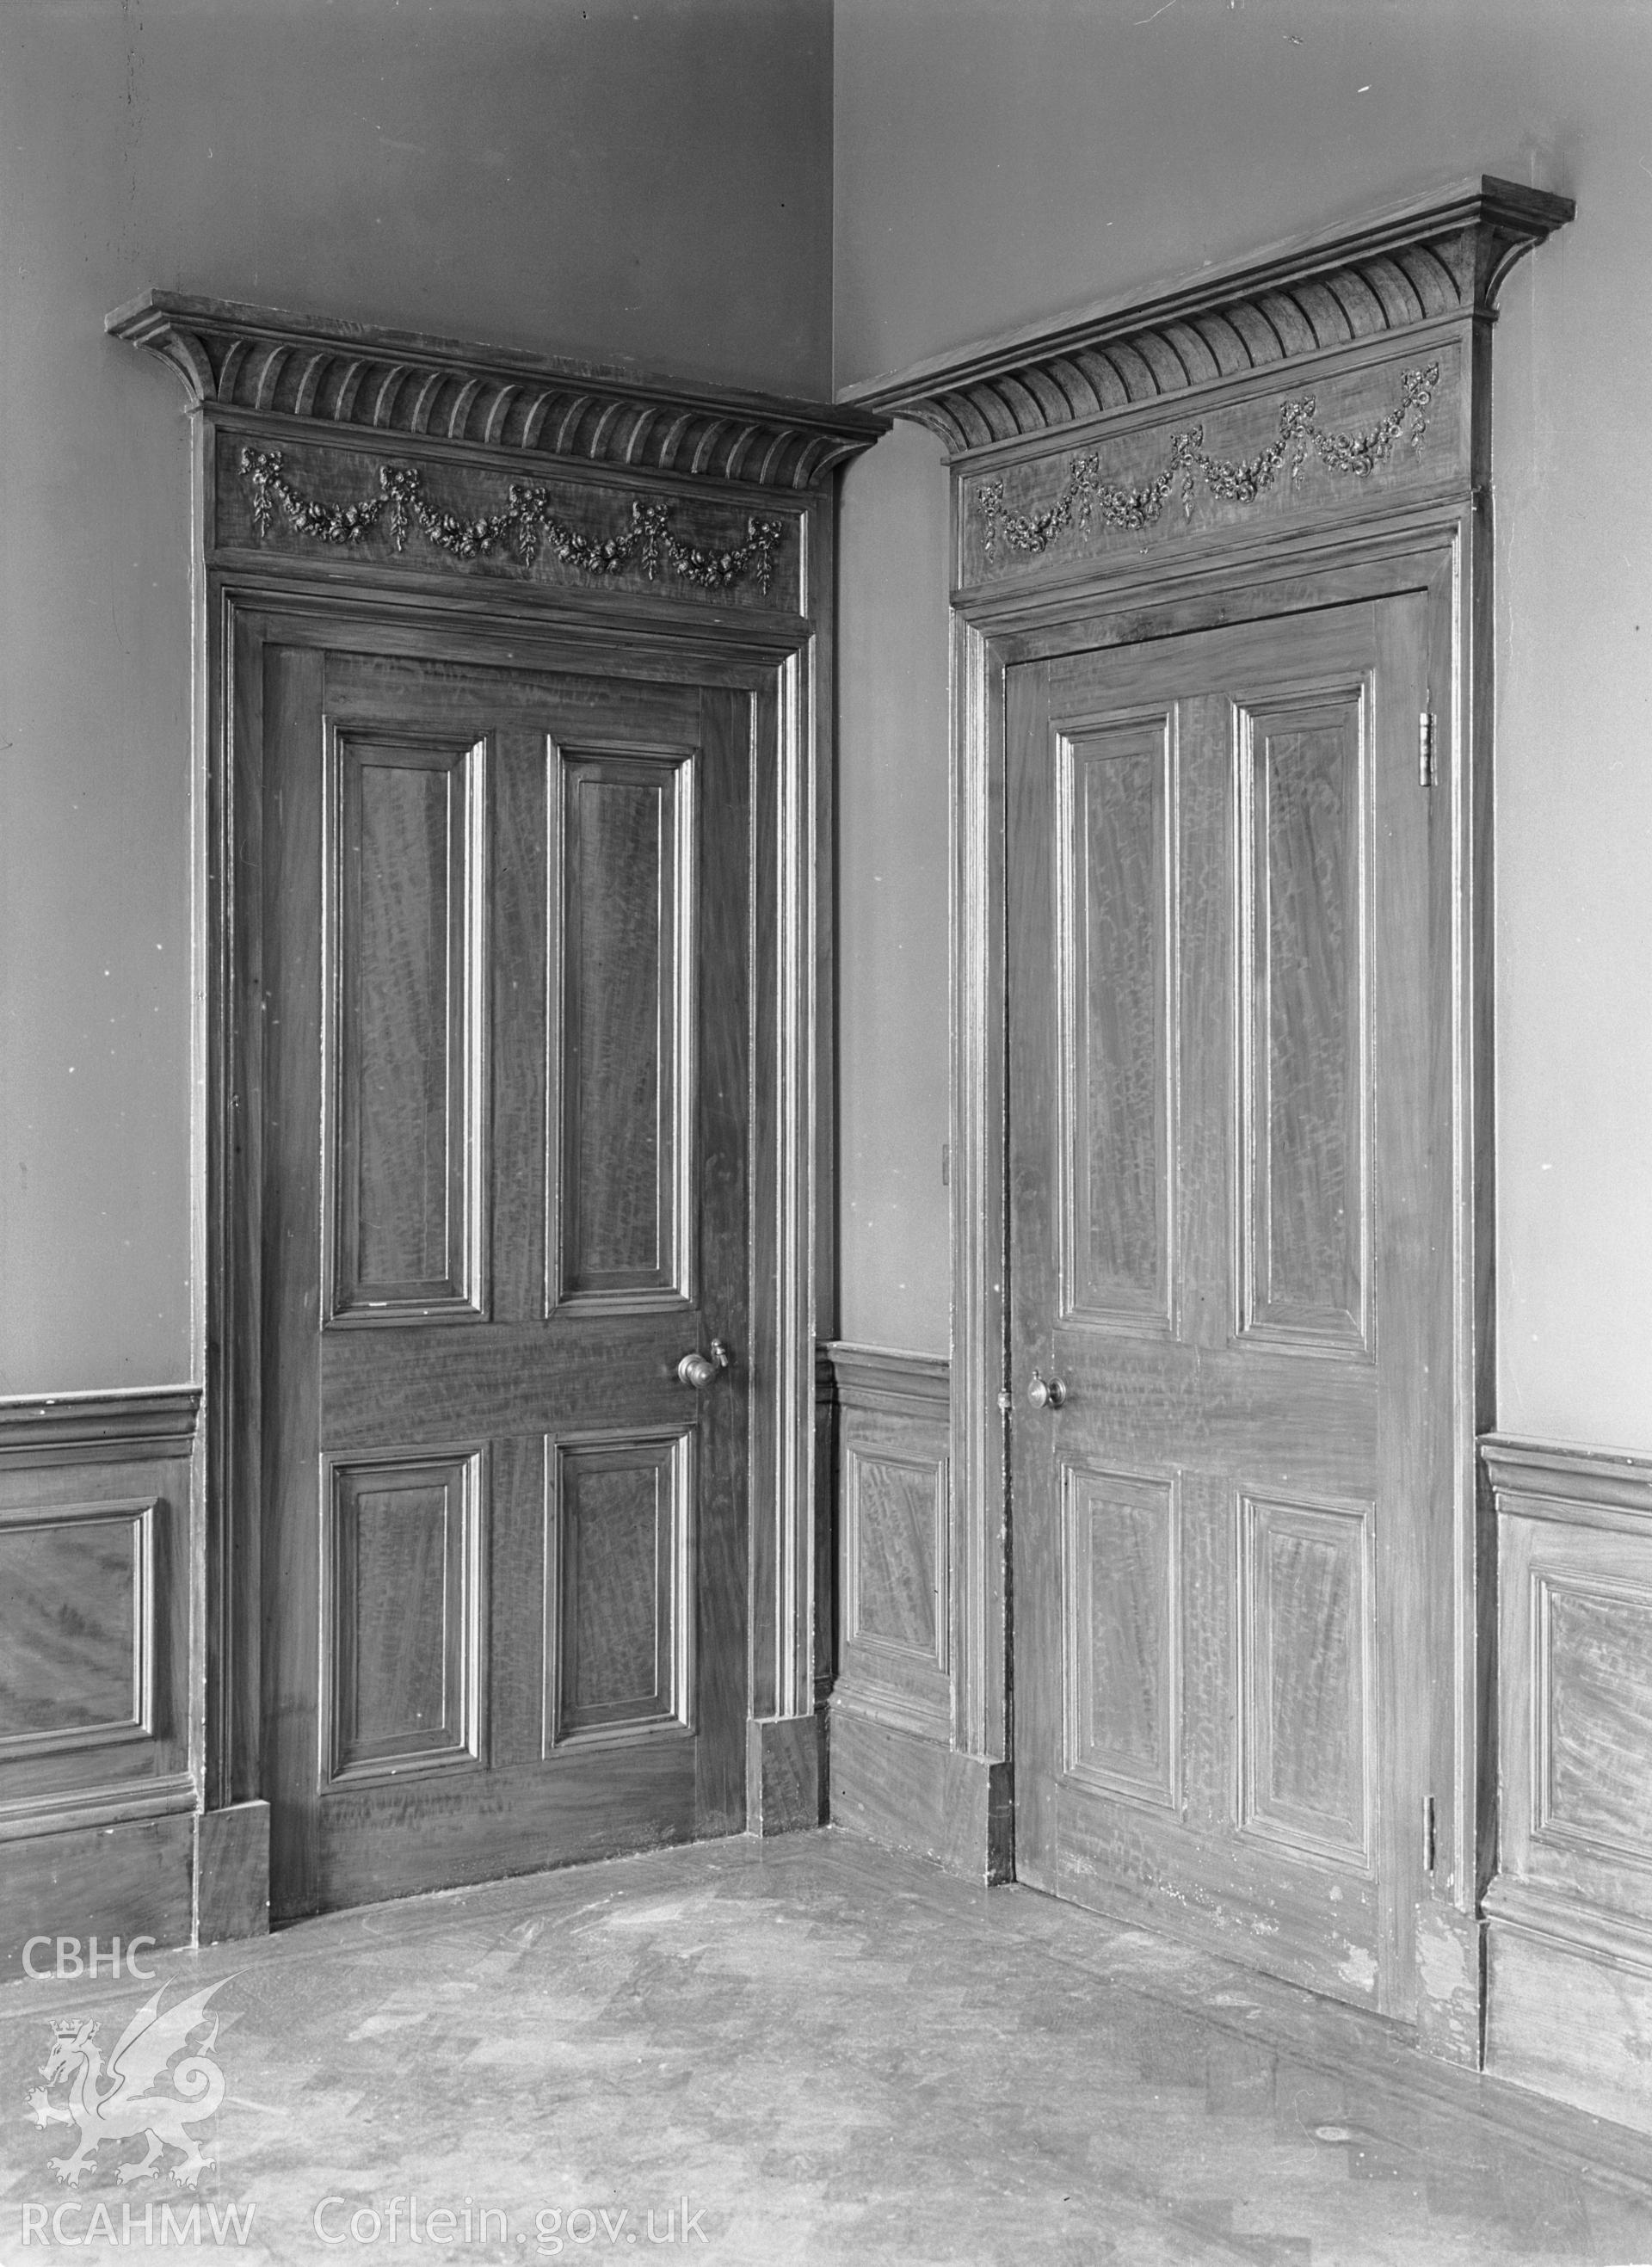 Interior view showing detail of door in the dining room.